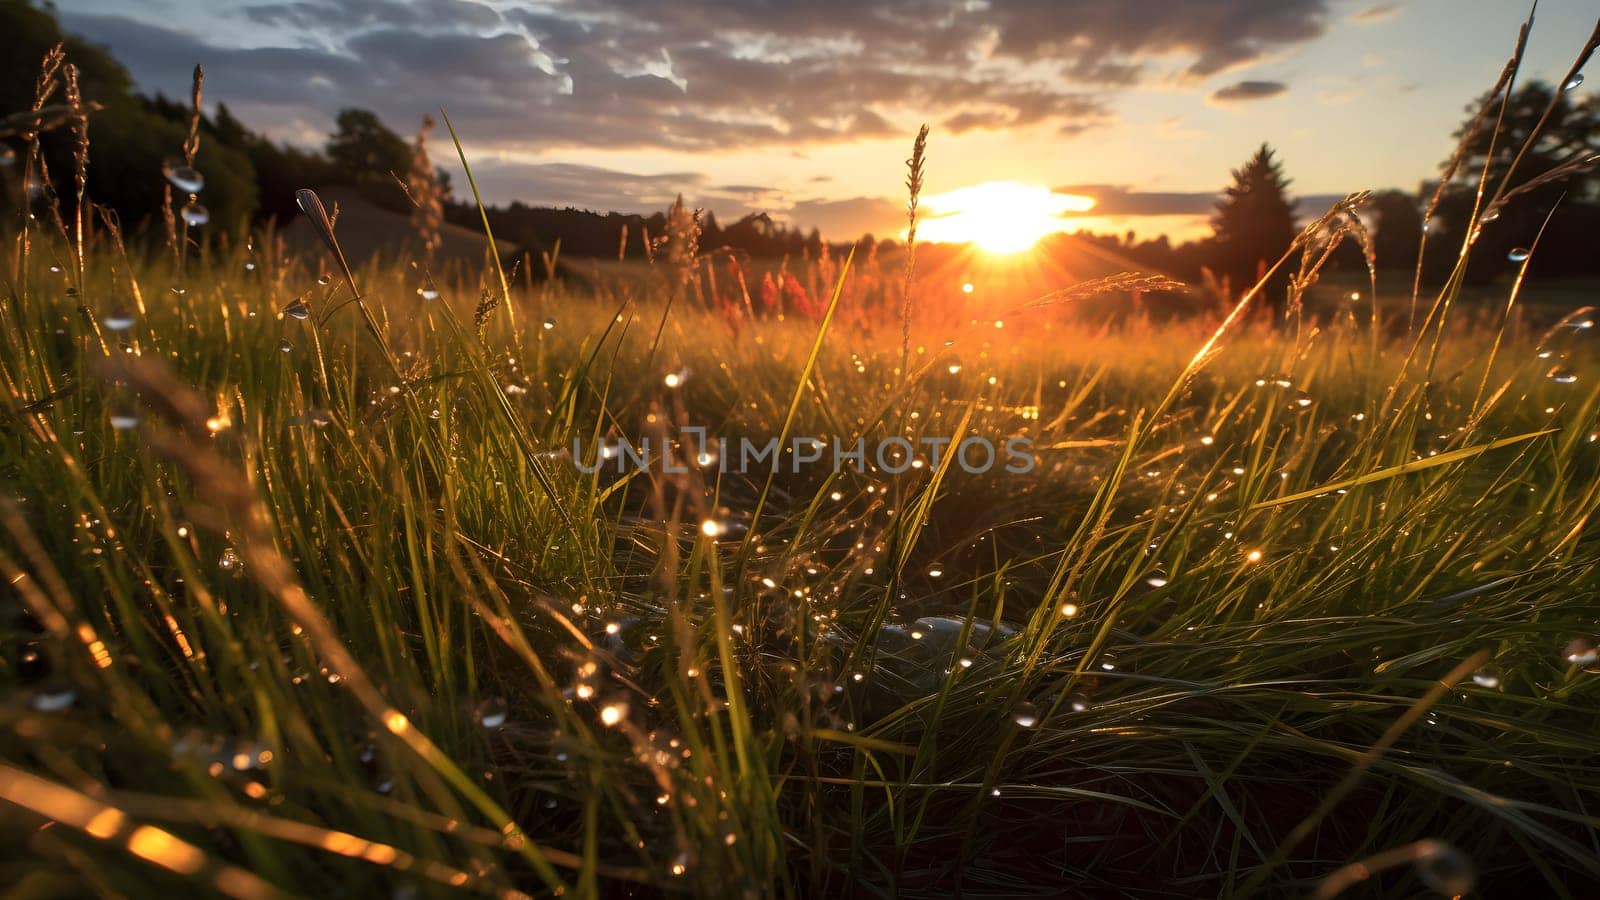 dew drops on morning grass at summer sunrise in the wild meadow, neural network generated photorealistic image by z1b